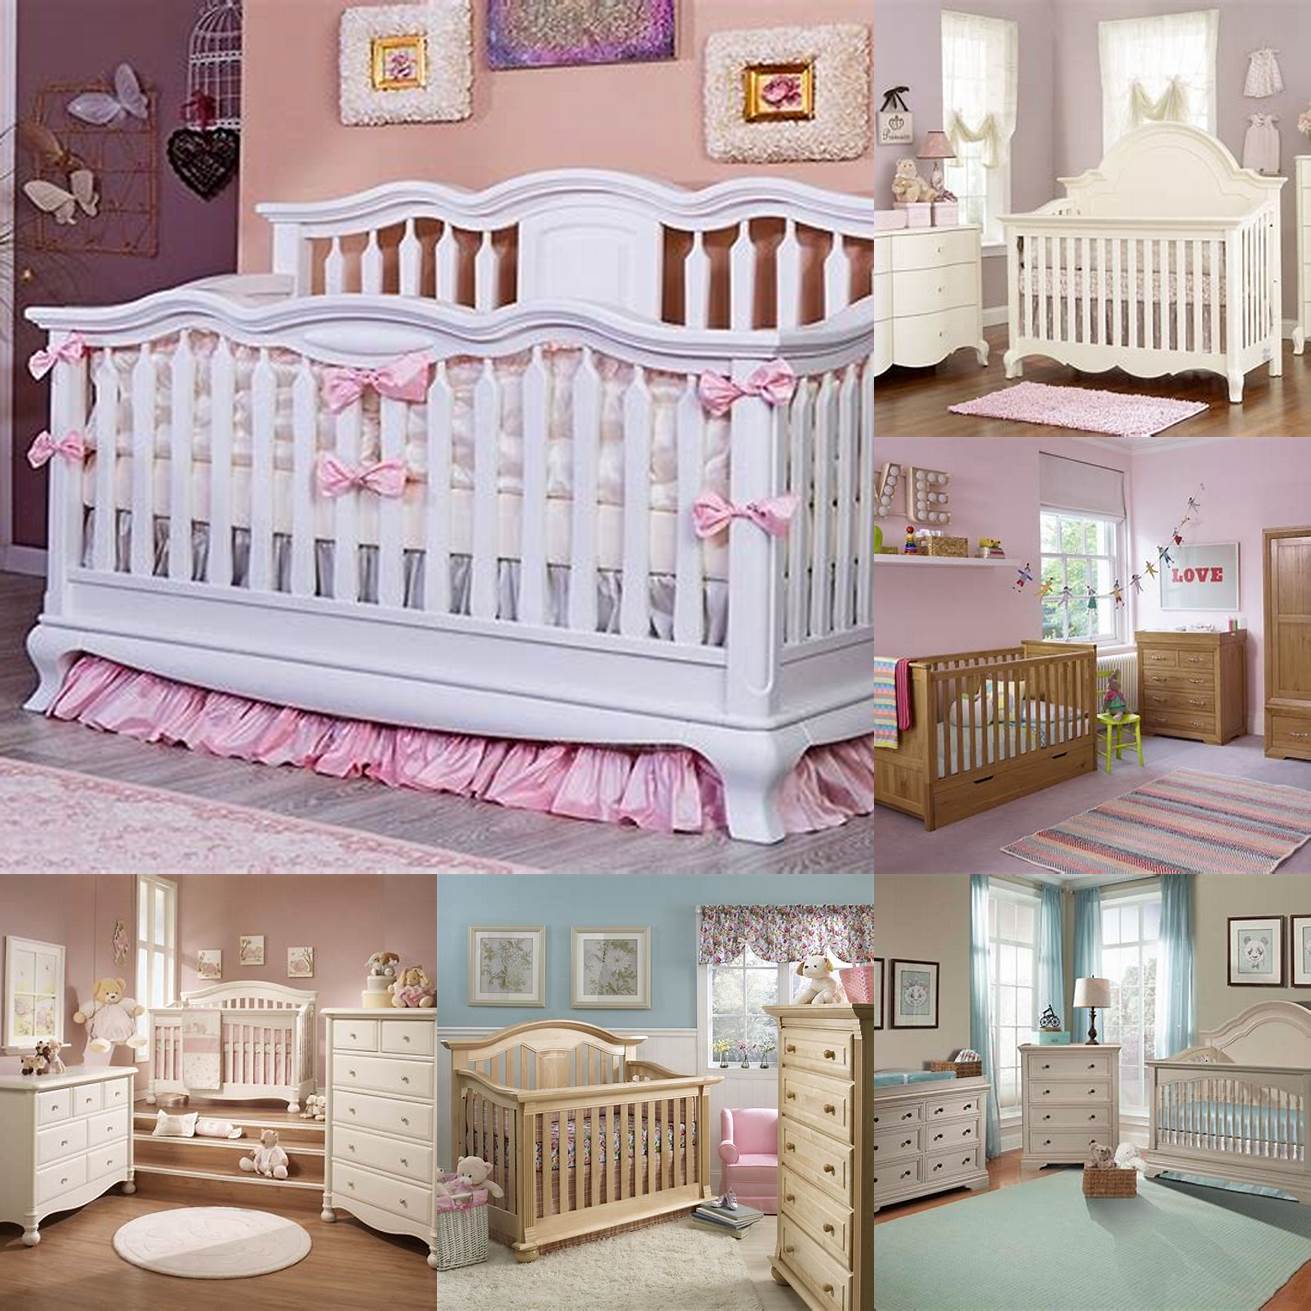 A traditional baby furniture set features classic designs